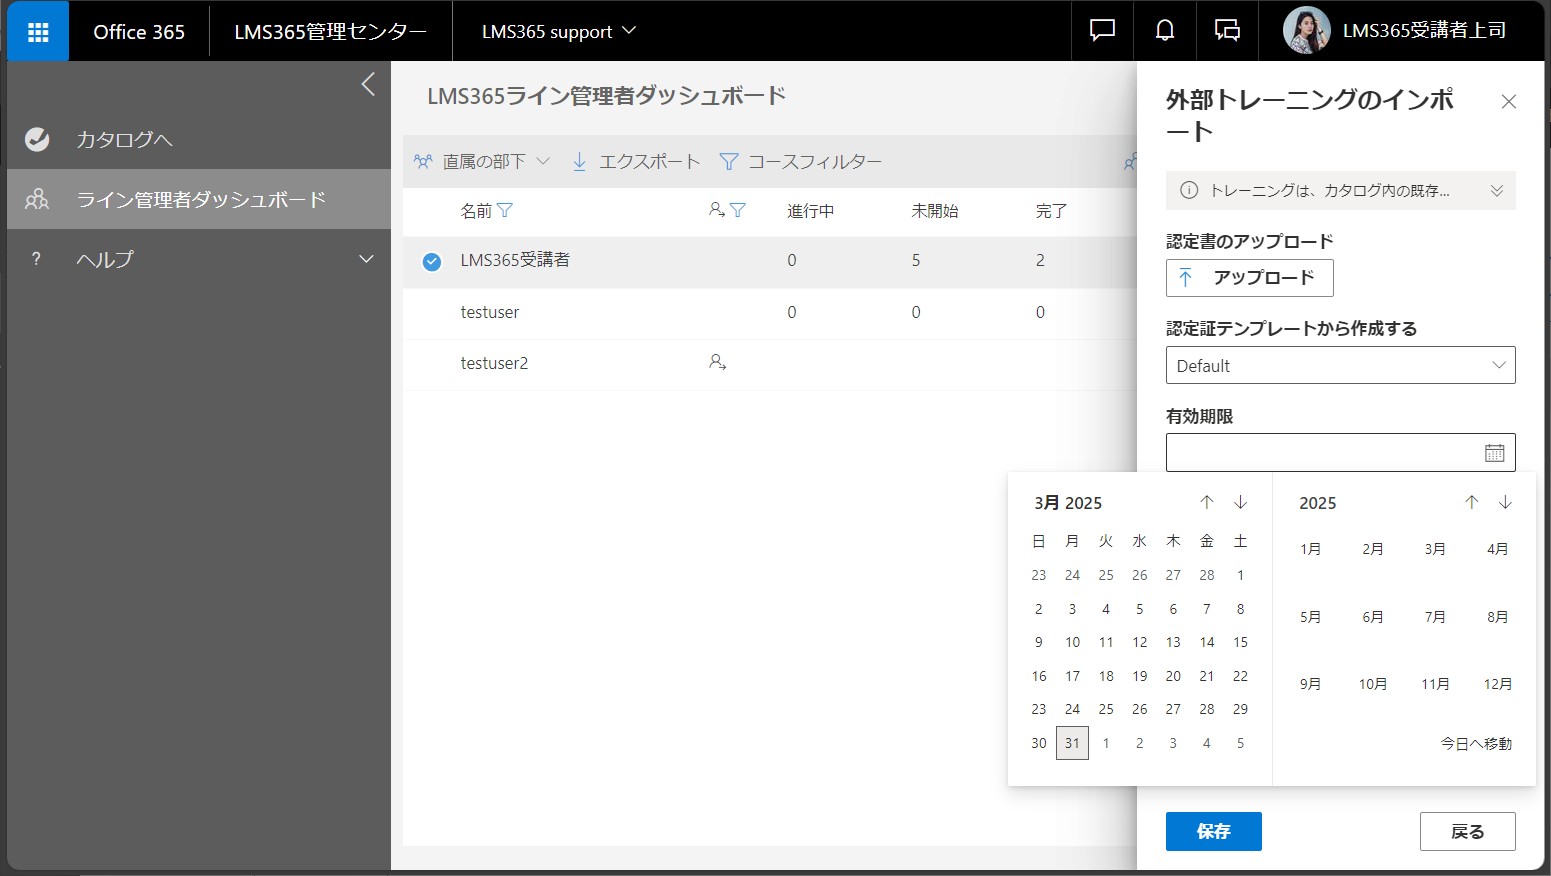 Line Manager Dashboard_User administration20.png